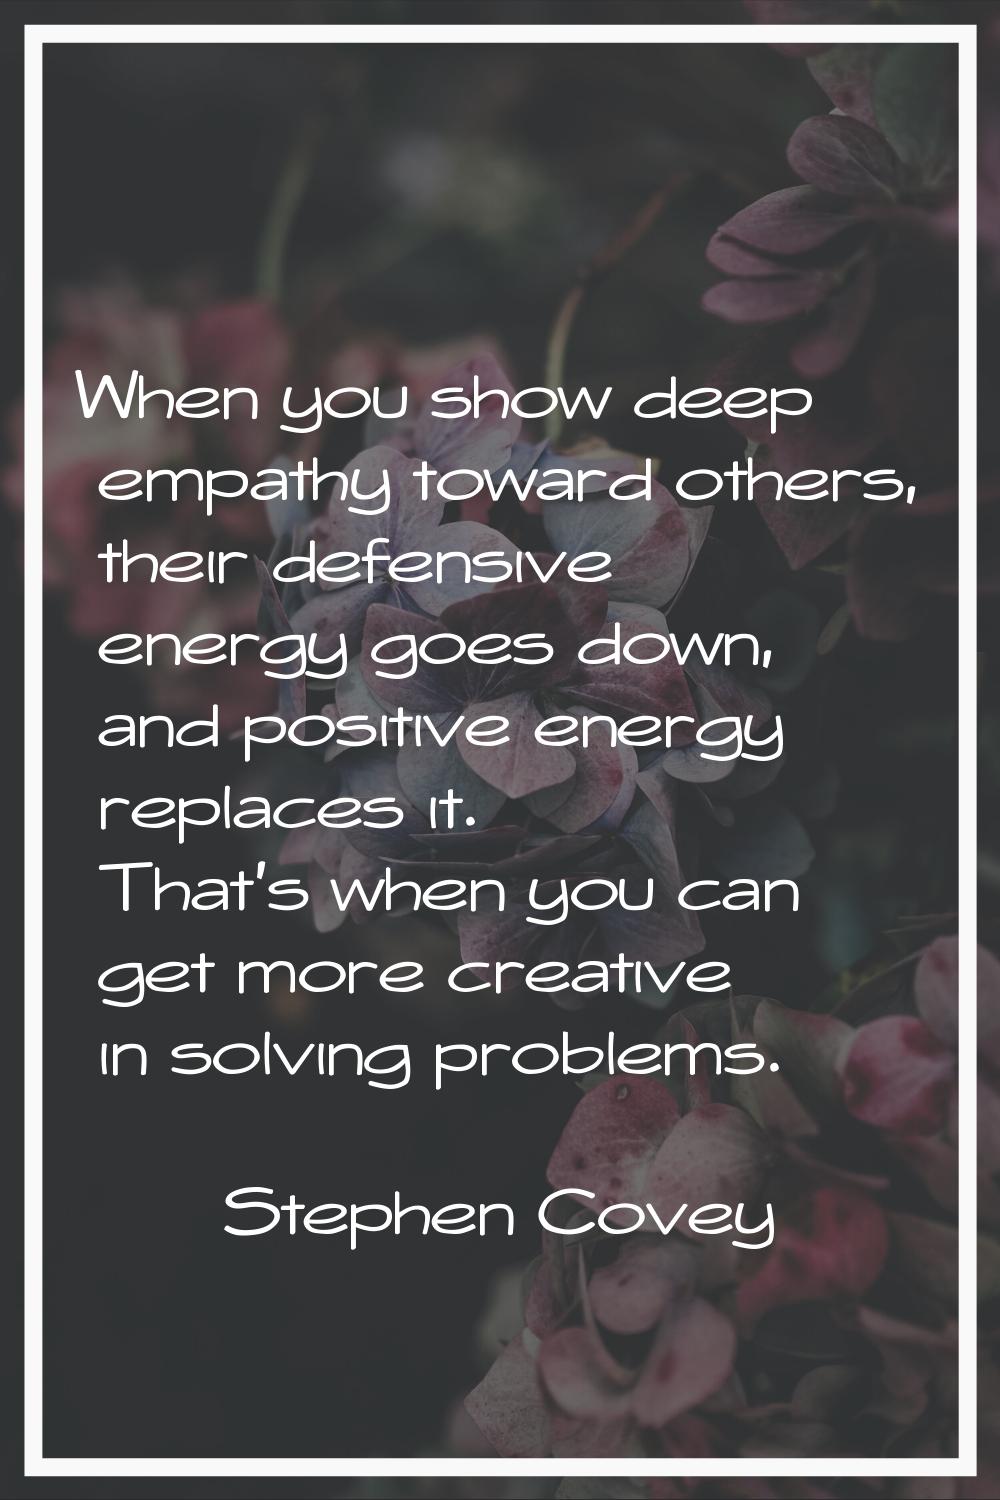 When you show deep empathy toward others, their defensive energy goes down, and positive energy rep